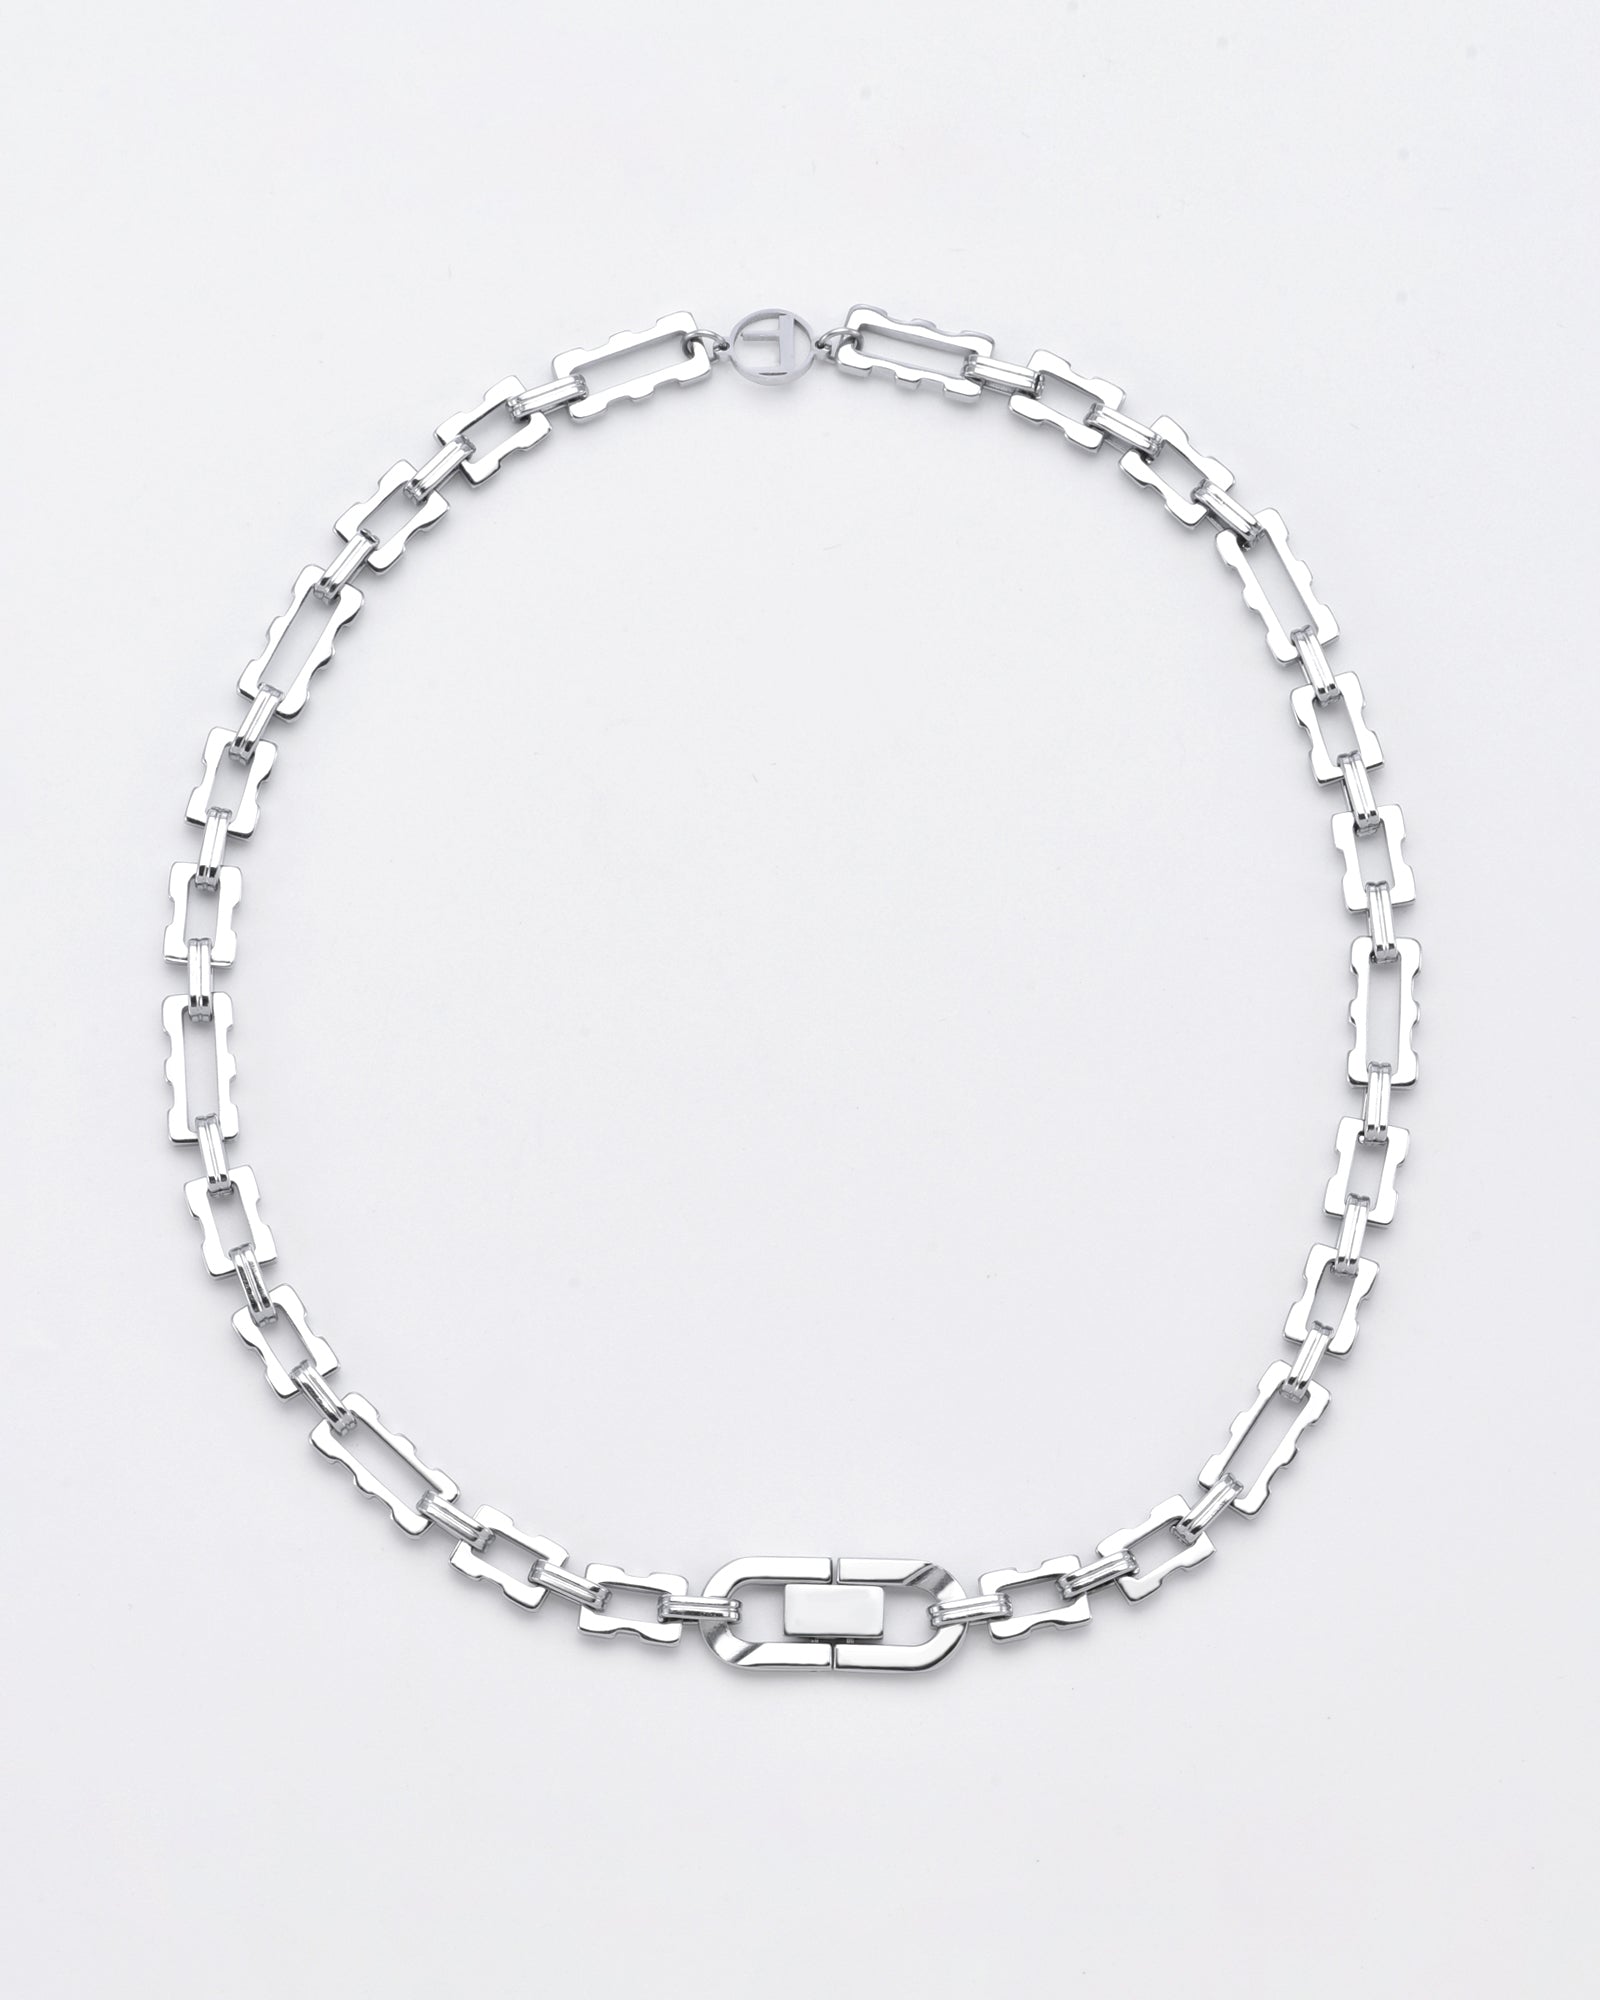 A silver Links Necklace Silver from For Art's Sake® with rectangular links arranged in a repeating pattern. The necklace has a sleek and modern design, featuring a distinctive rectangular clasp at the front. The background is plain white, highlighting the necklace's 24k gold-plated polished finish.